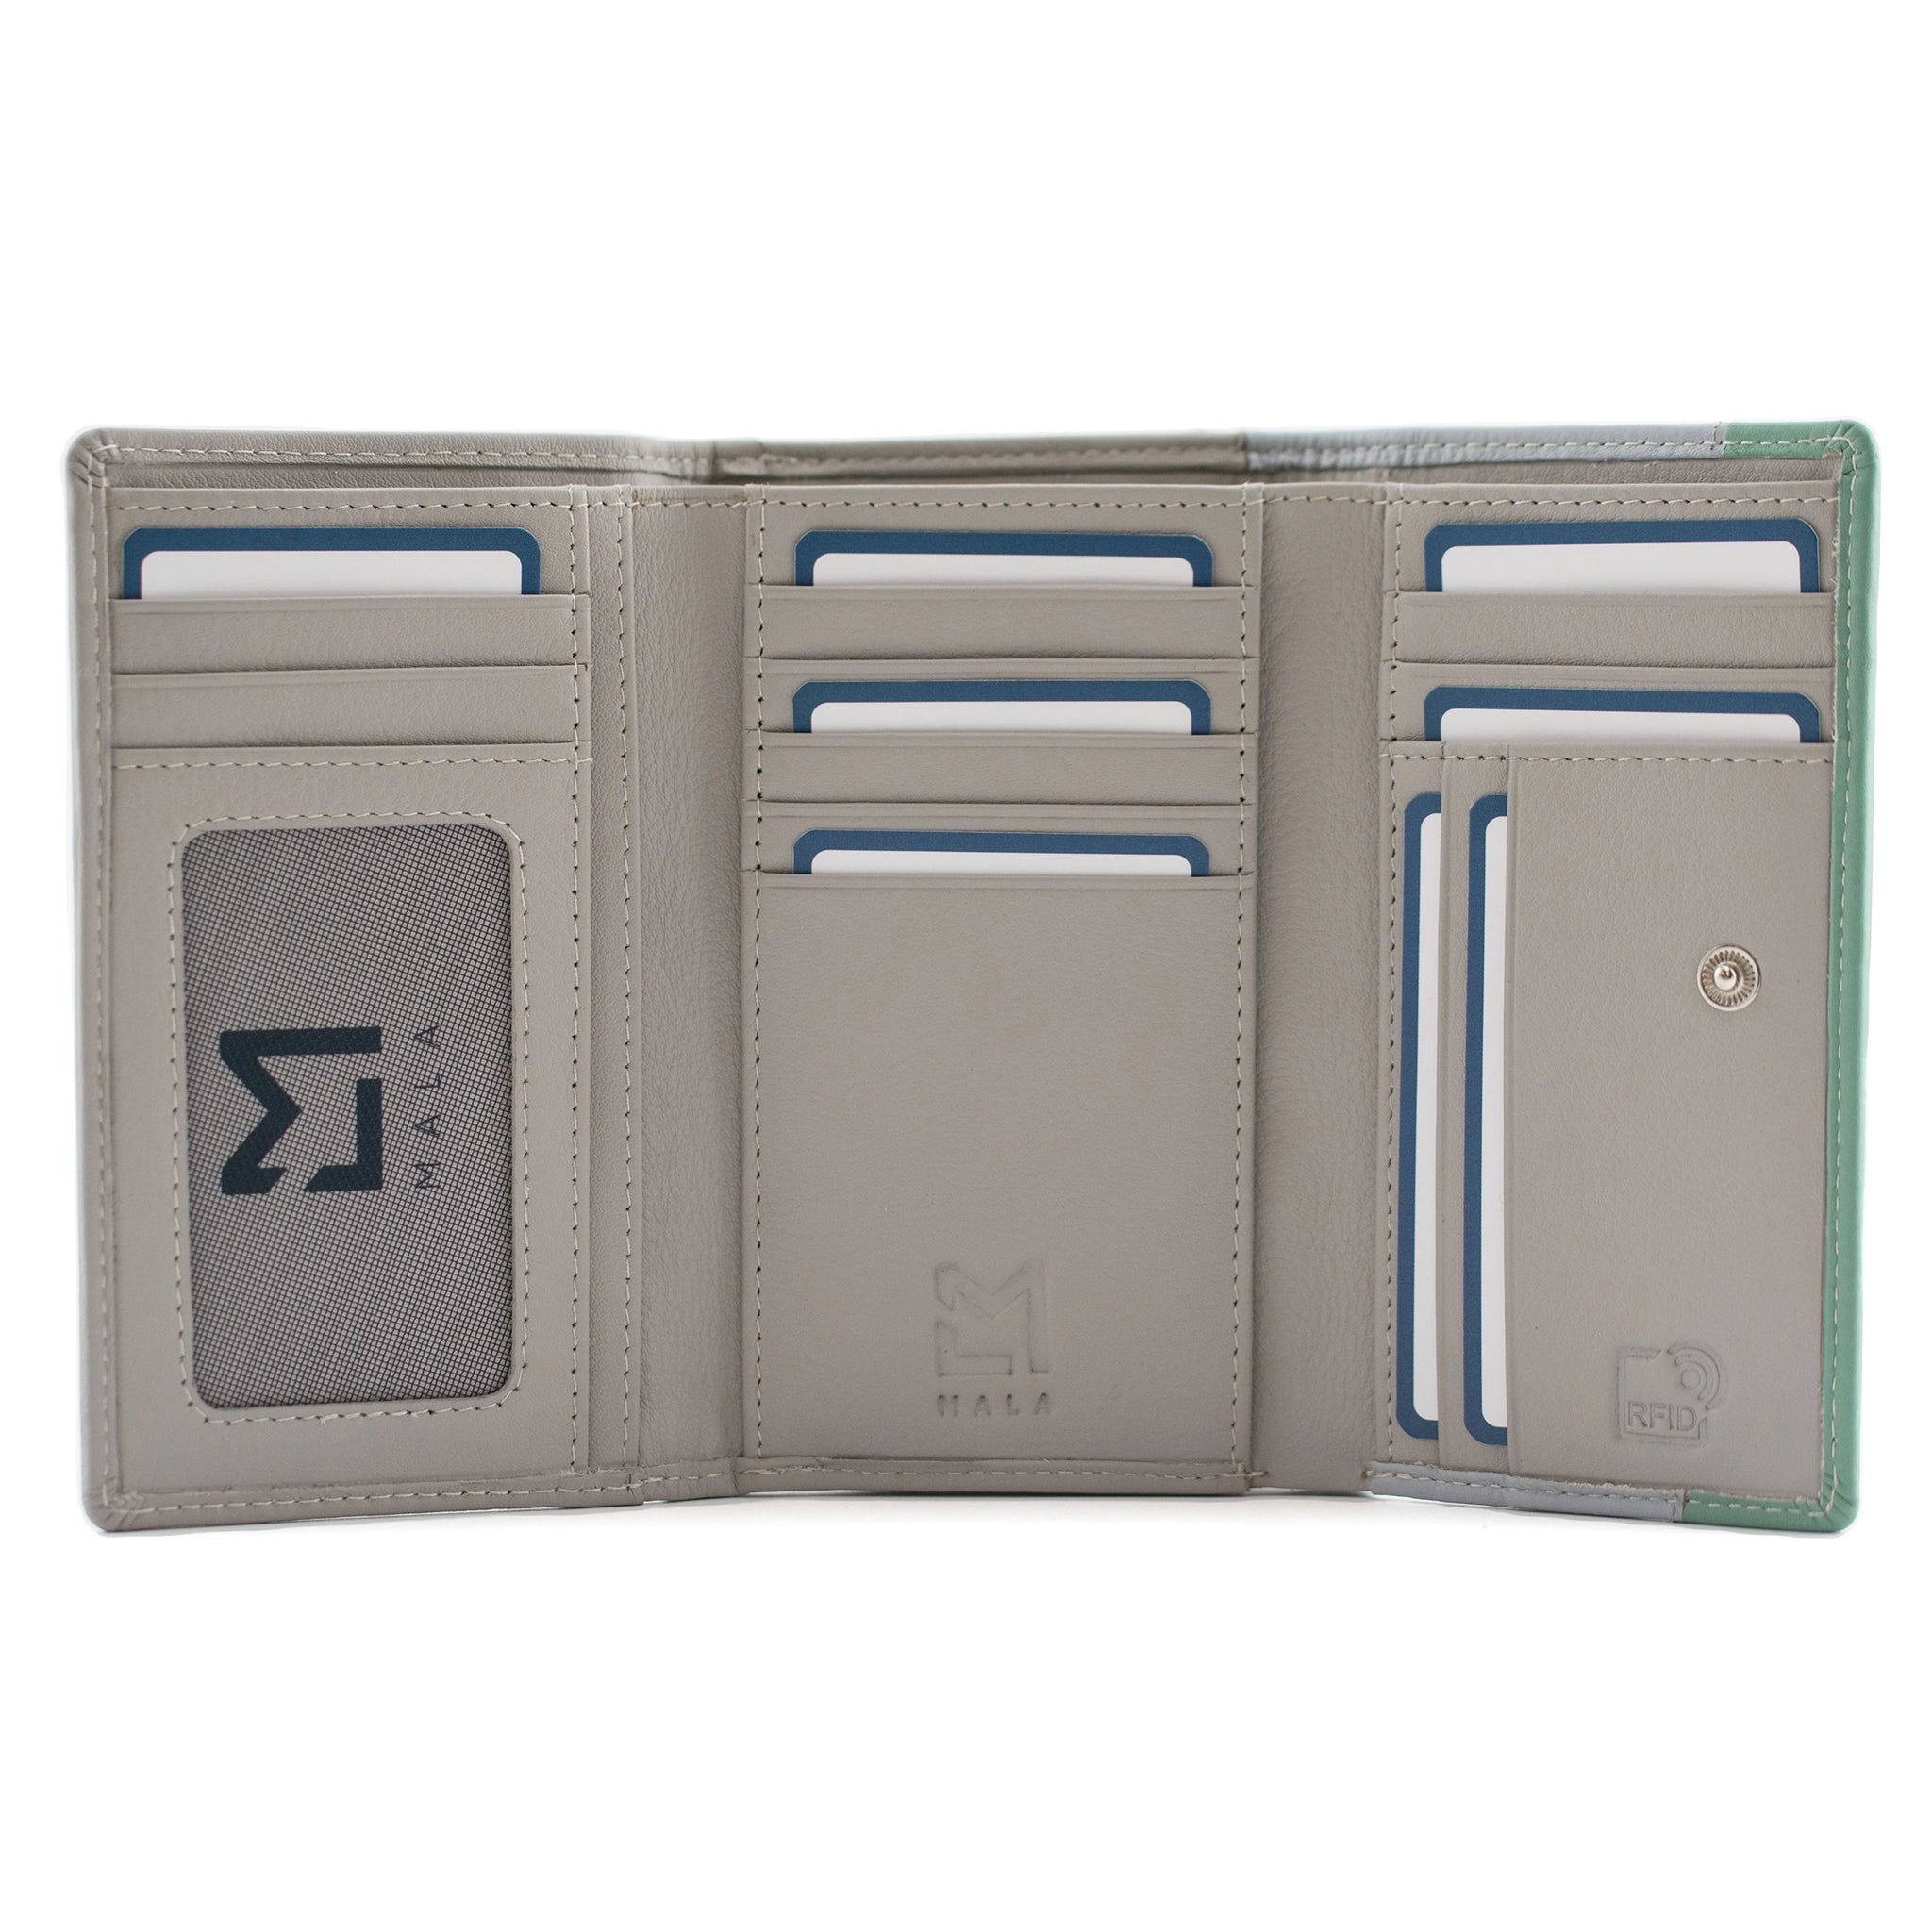 Inside of a tri=fold grey leather purse with 12 card slots and a mesh ID window